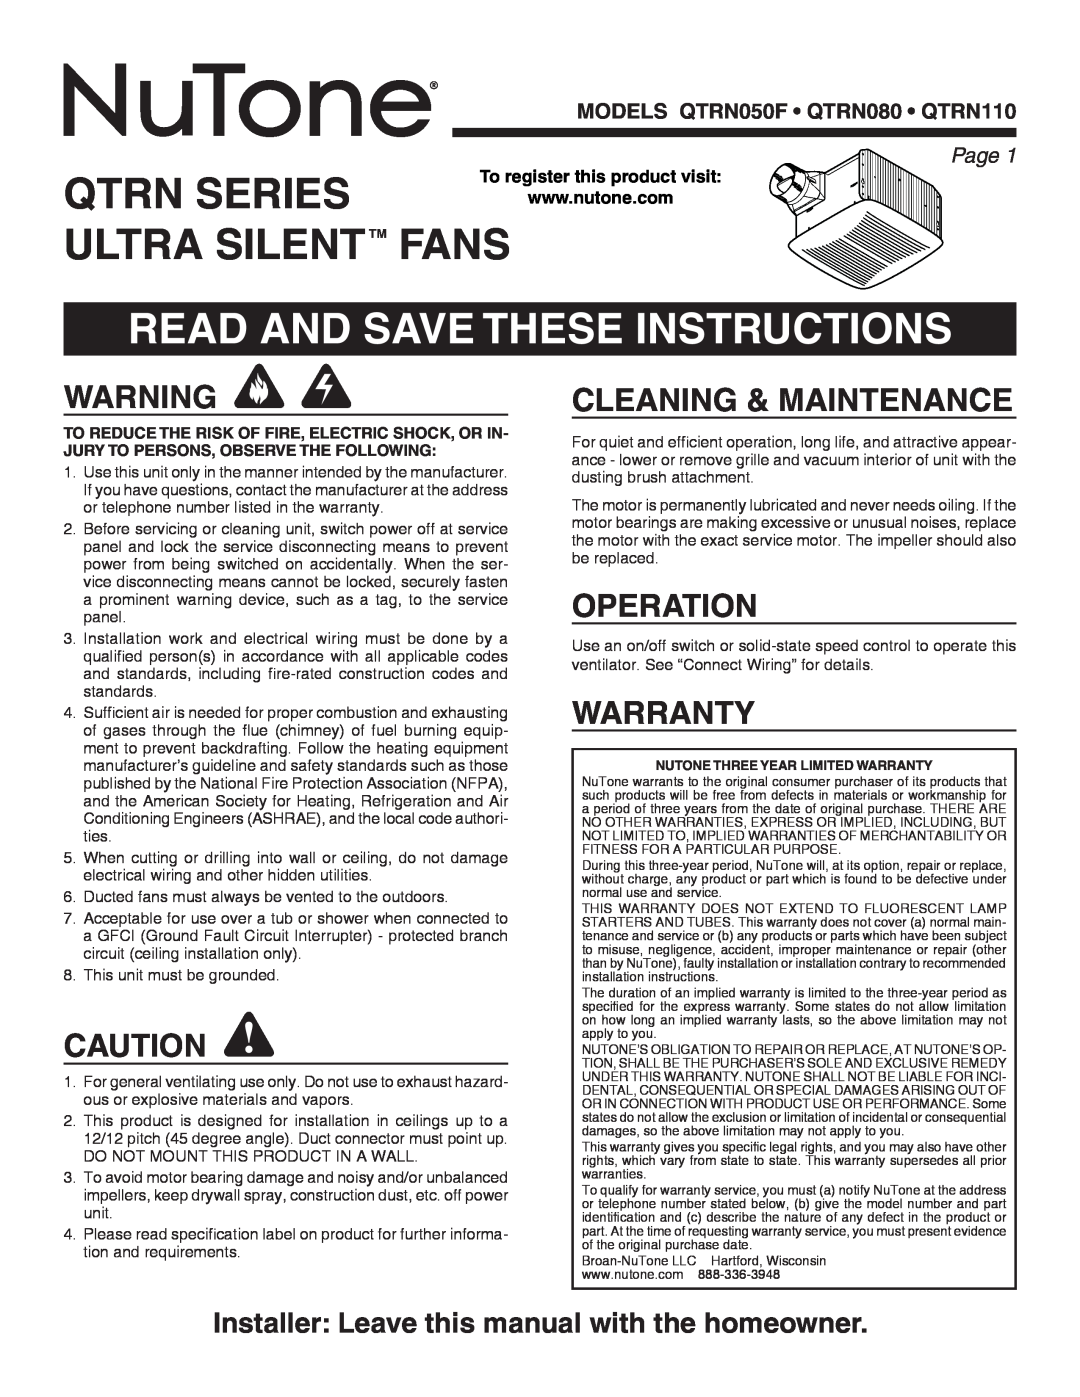 NuTone QTRN110 warranty Qtrn Series, Ultra Silenttm Fans, Read And Save These Instructions, Cleaning & Maintenance, Page  